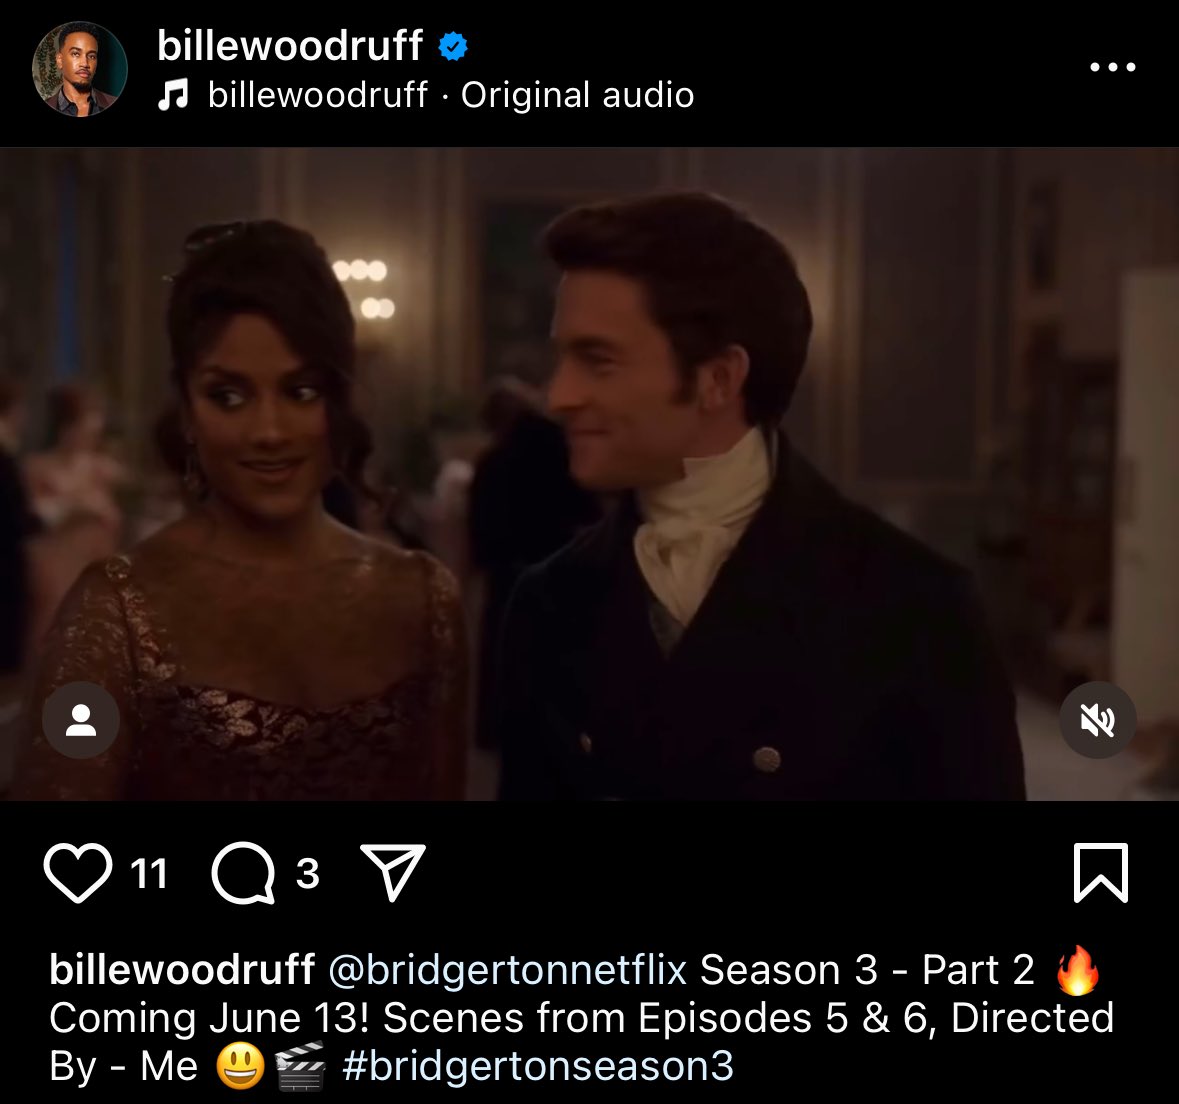 The director of eps5-6 just posted the teaser for the episodes on his insta 🔥 #Bridgerton